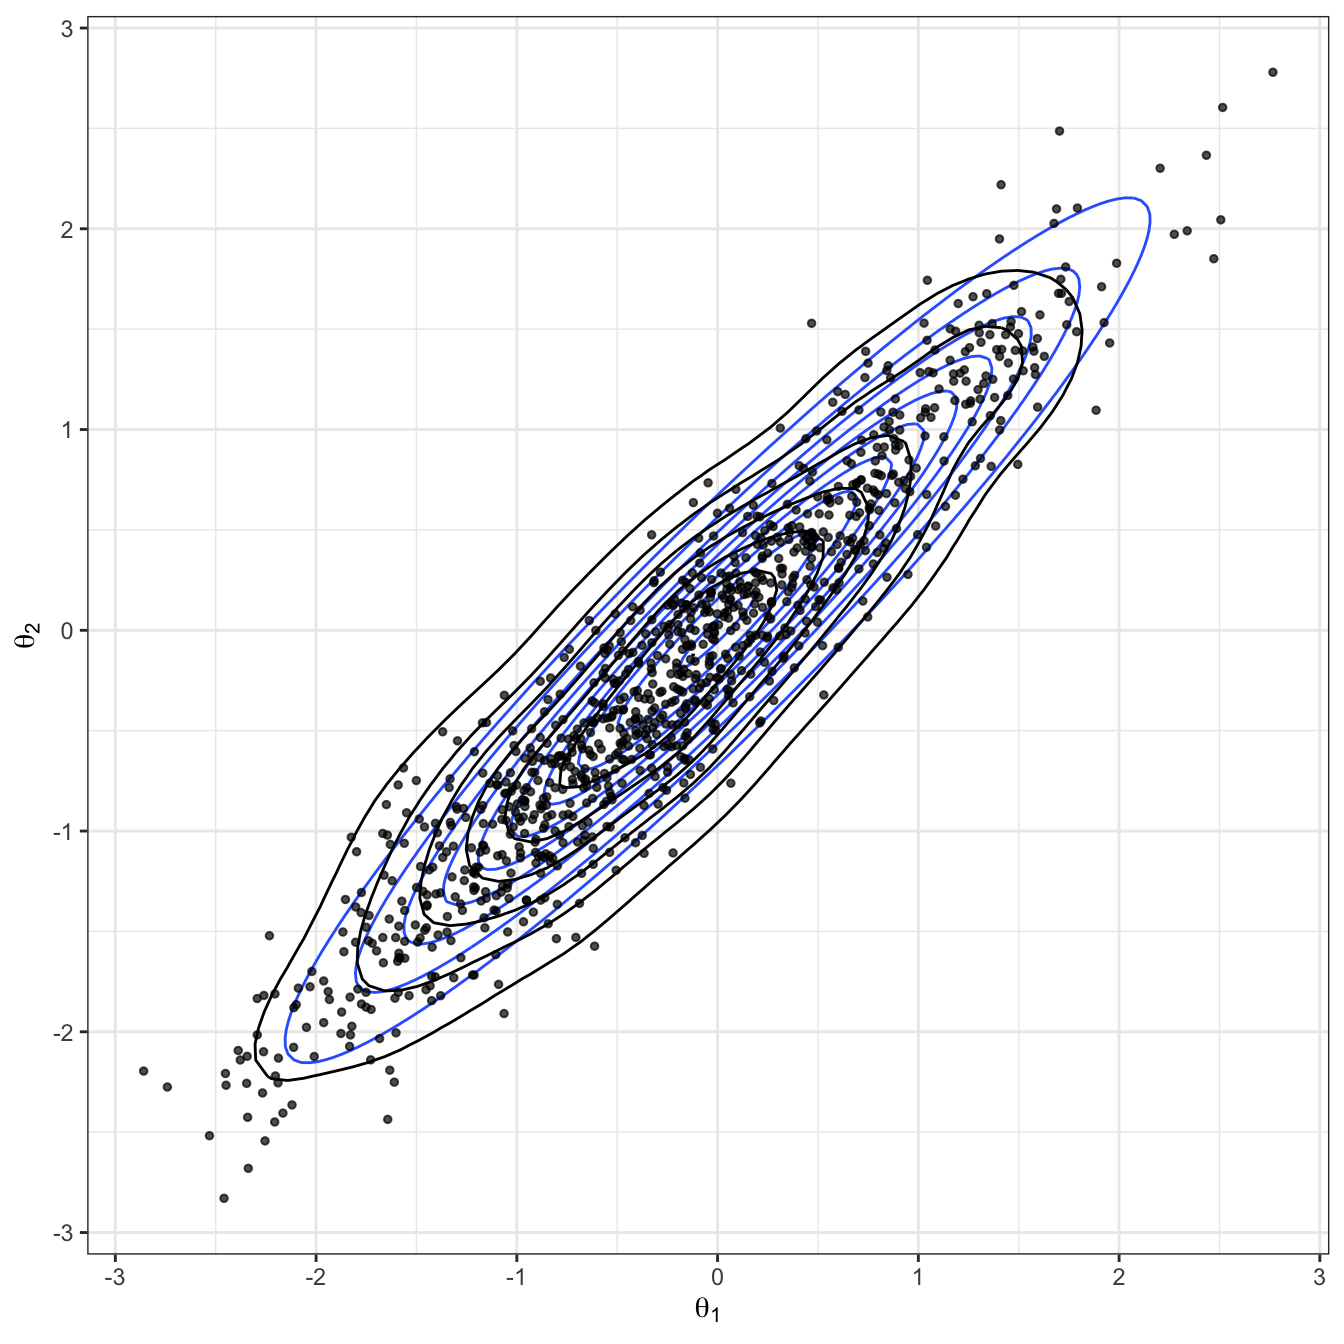 Bivariate Gaussian sampled using a Gibbs algorithm. The true Gaussian density is shown in blue, and overlaid in black with both the samples and estimated density.